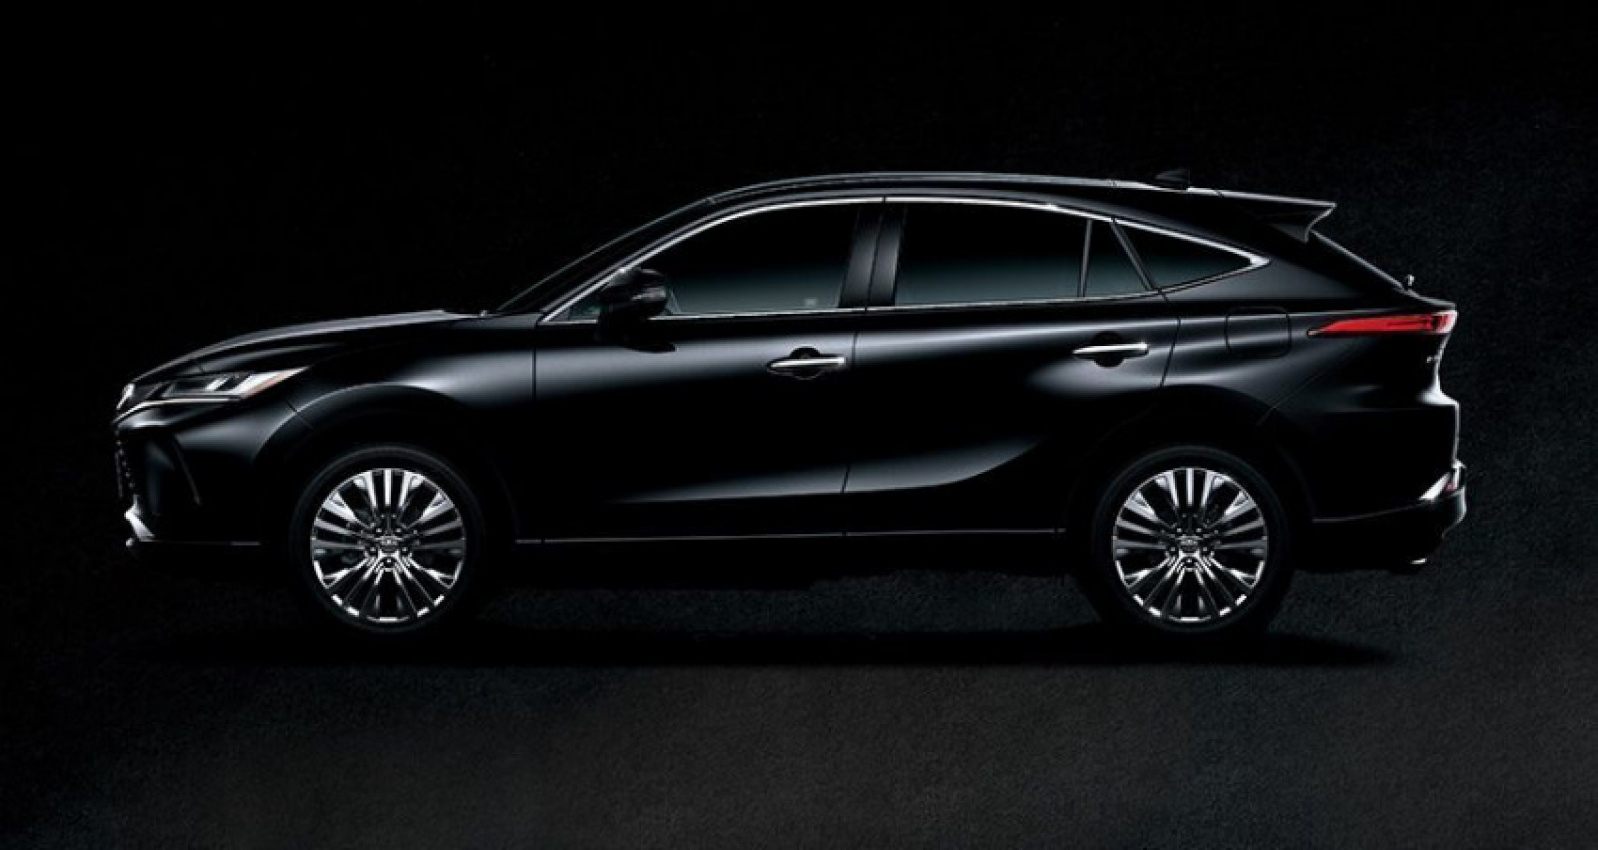 autos, cars, toyota, auto news, toyota harrier, new toyota harrier to debut in june